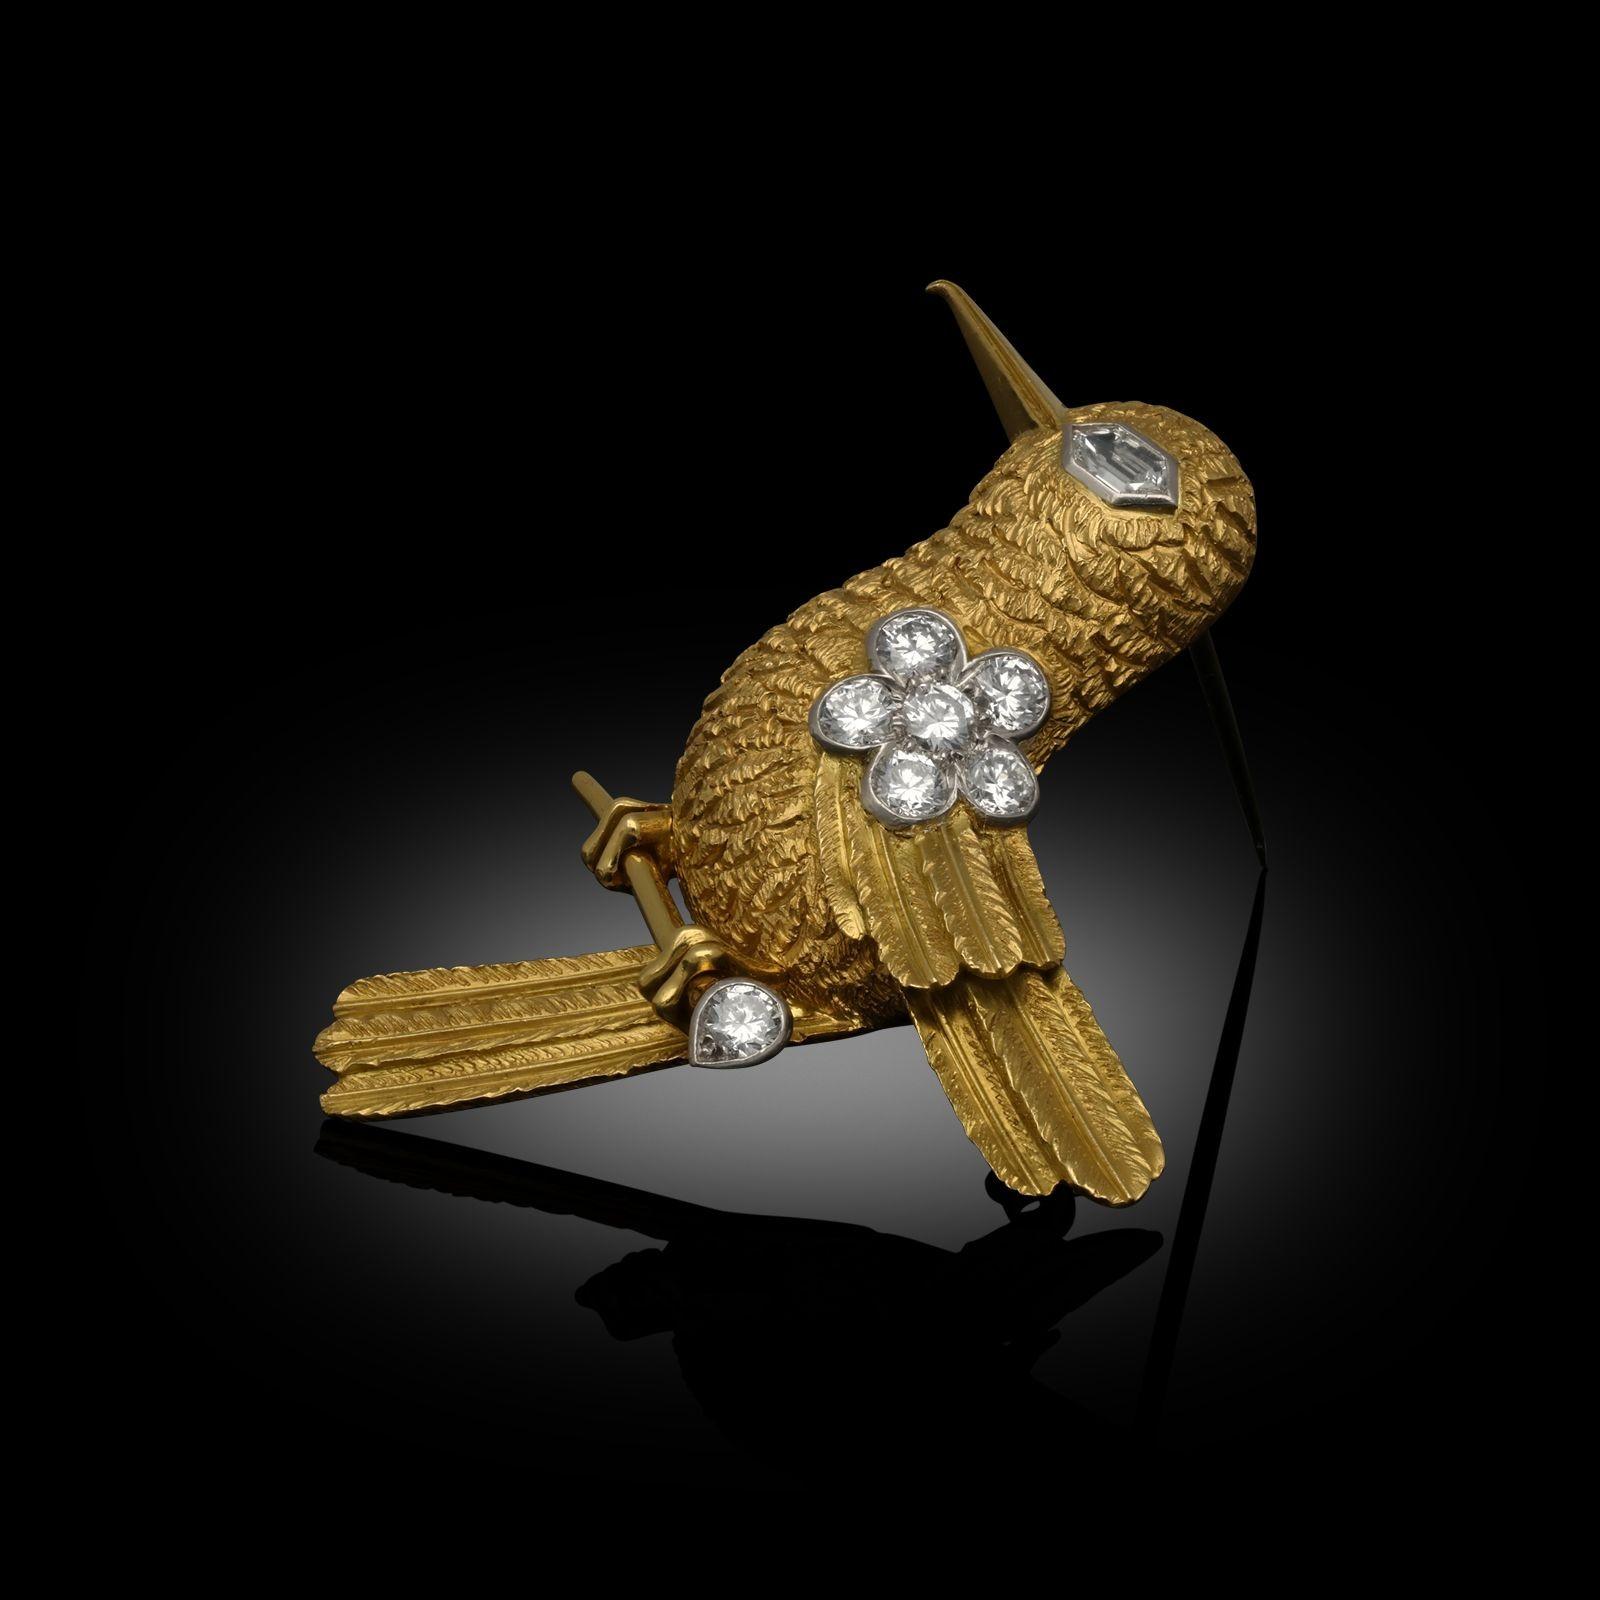 A charming gold and diamond stylised hummingbird brooch by Cartier c.1960s, the body finely modelled in 18ct yellow gold with a textured finish and carefully formed feathers, the beak and feet in polished gold, the eye set with a hexagonal shaped